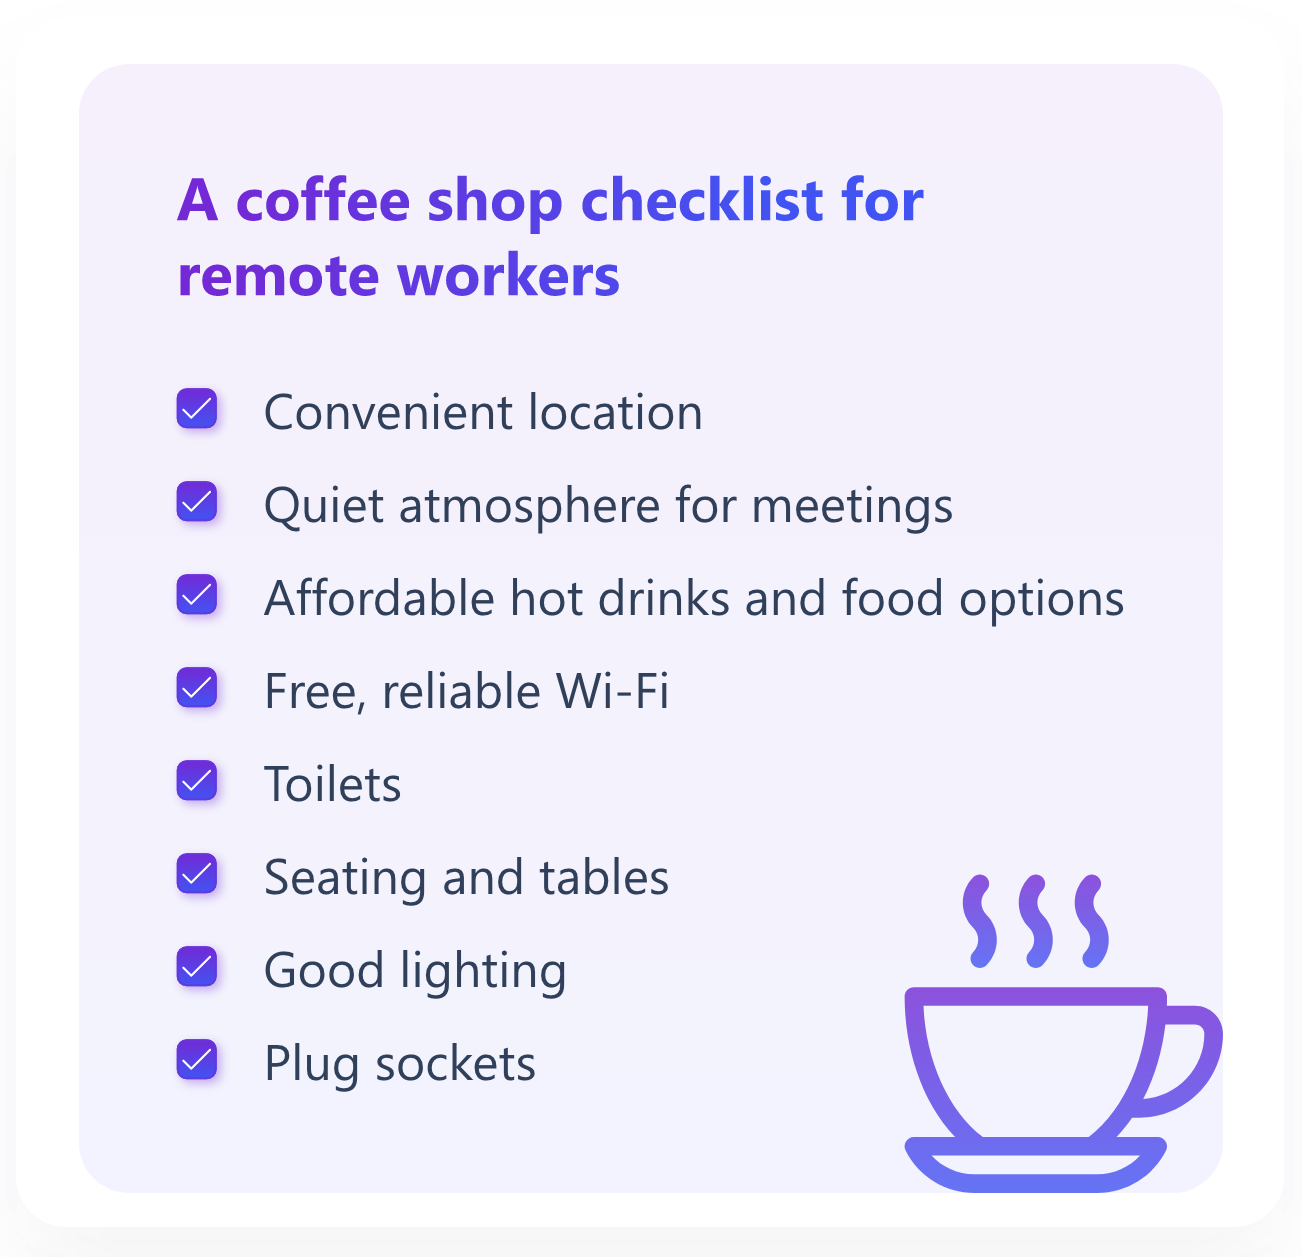 Coffee shop checklist for remote workers